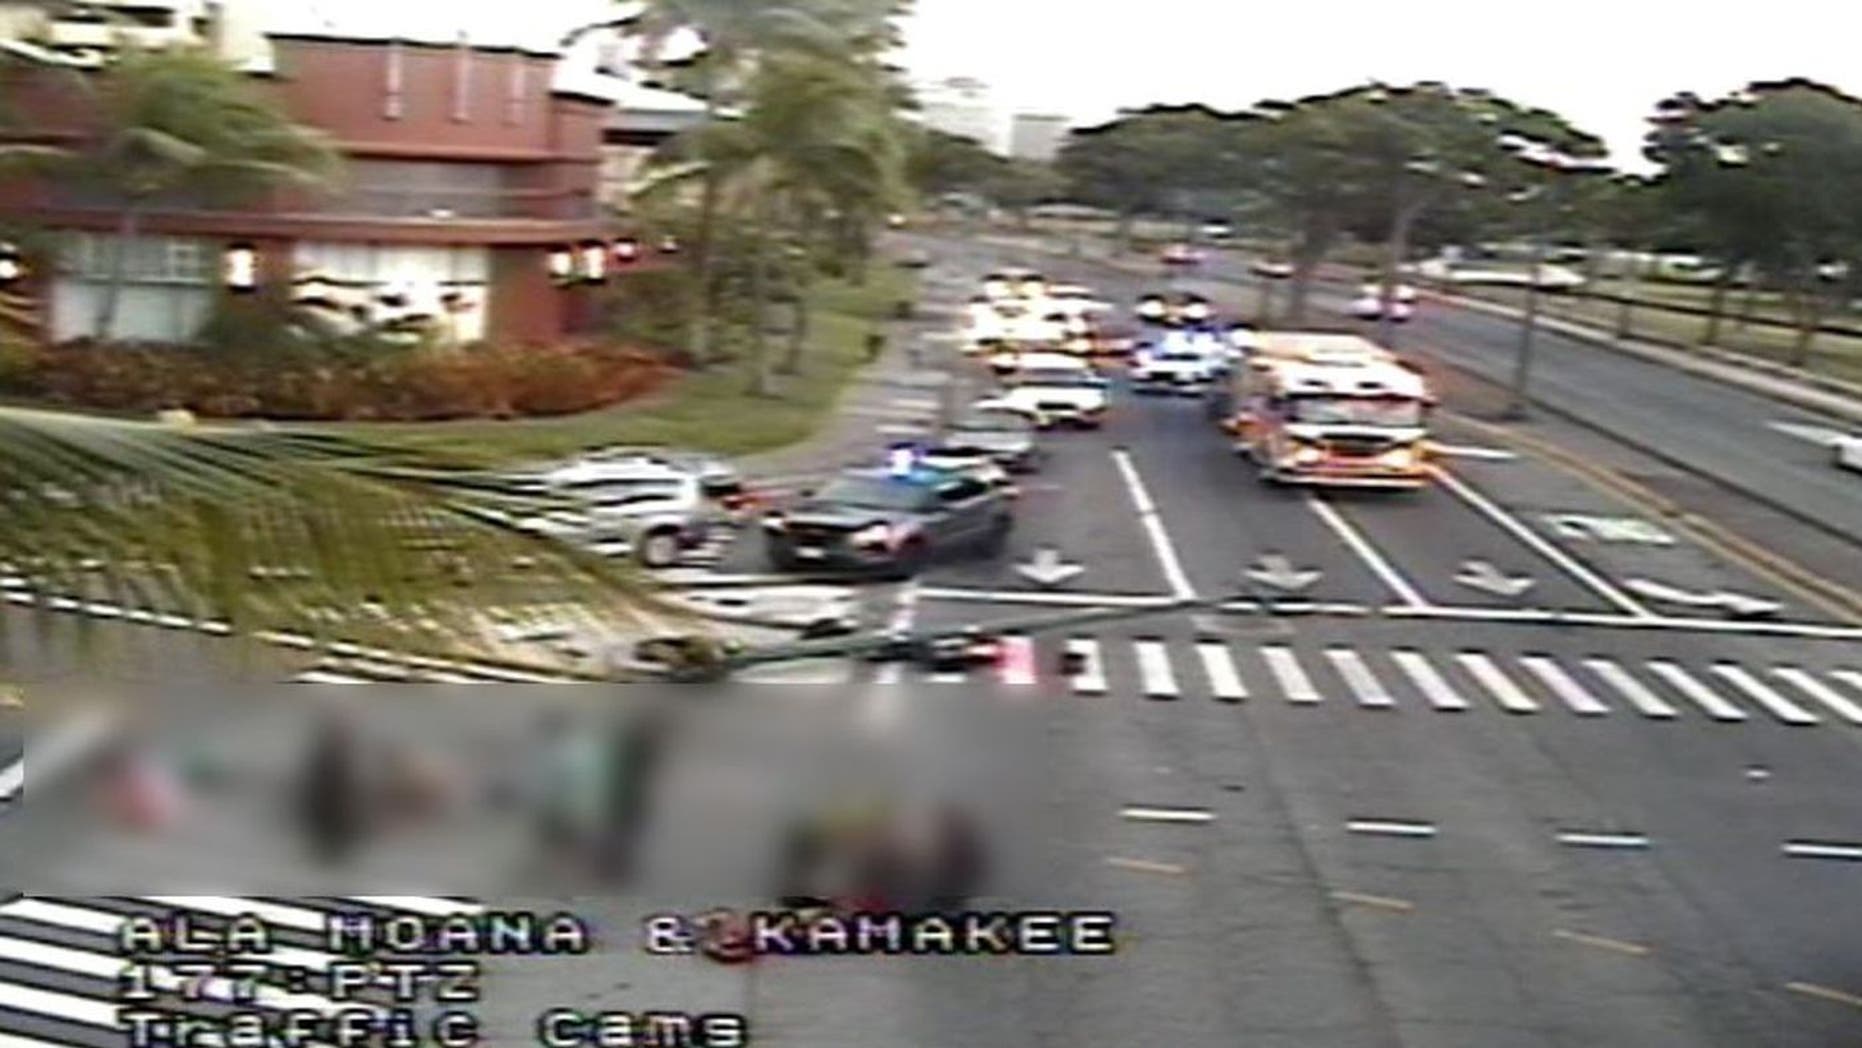 3 killed, 5 injured in deadly vehicle collision in Hawaii: police